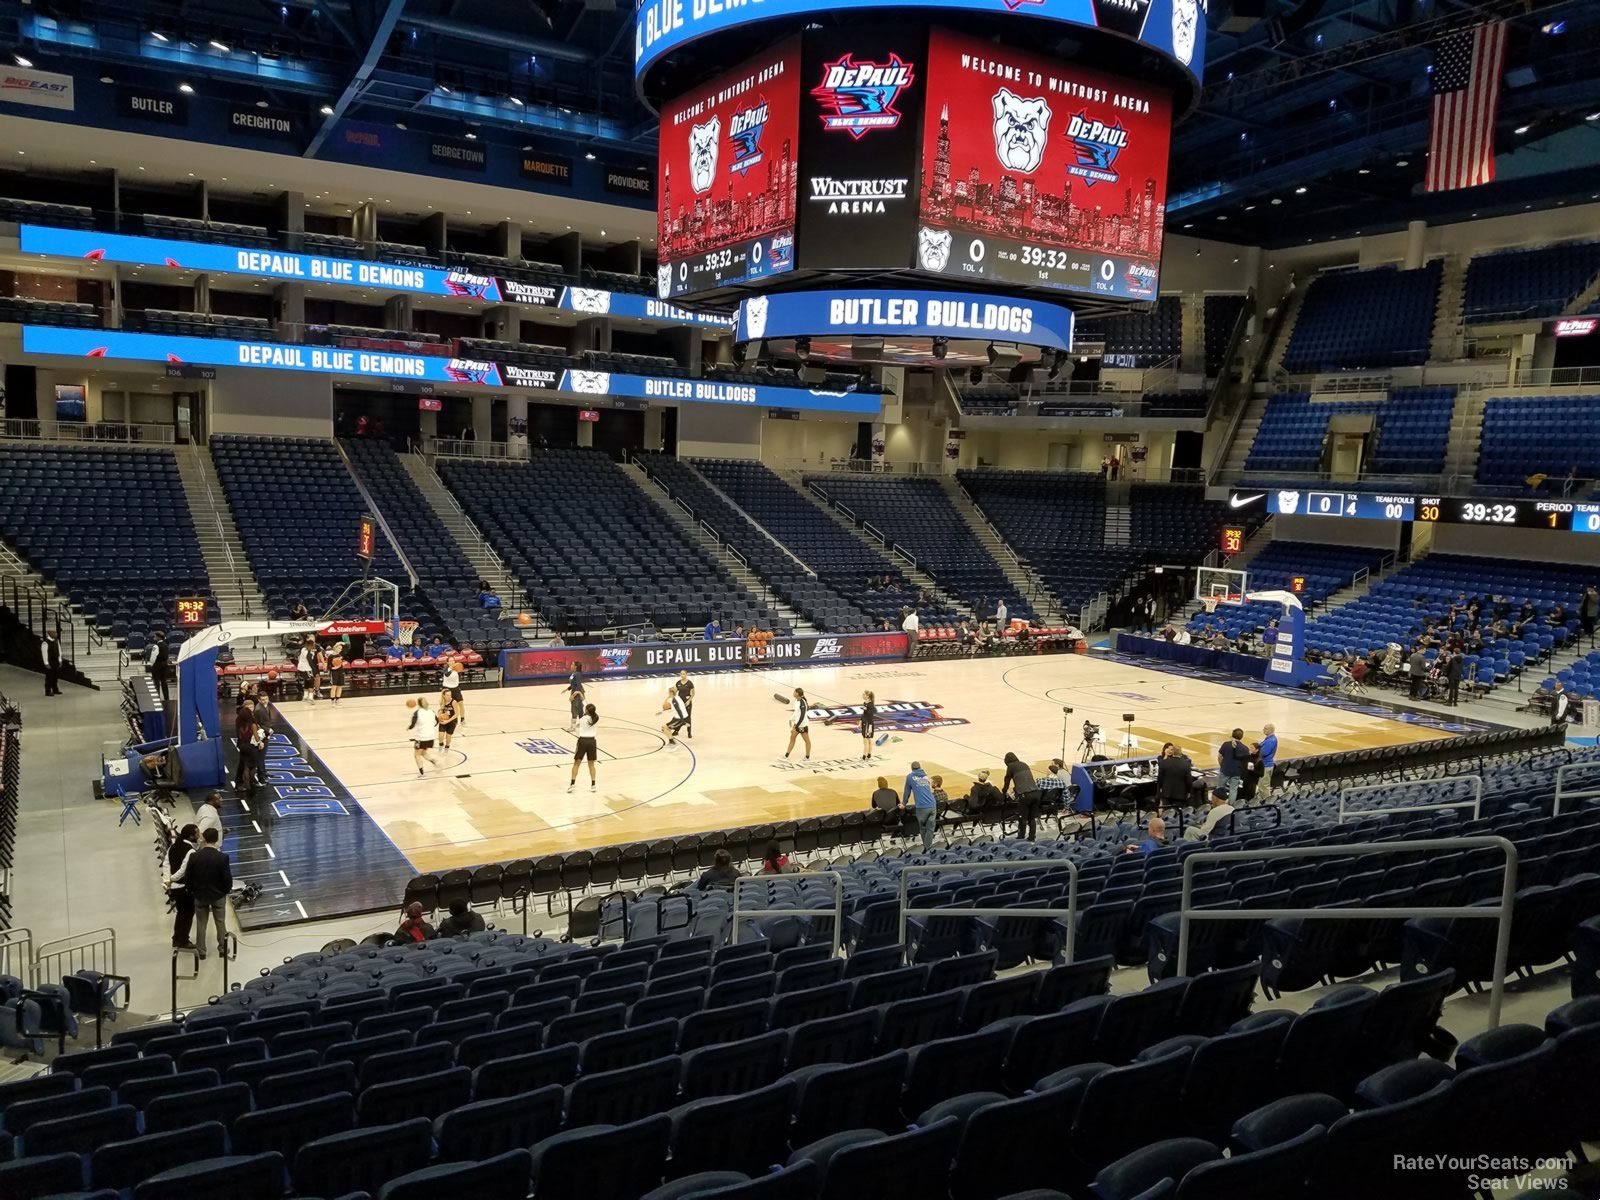 Section 126 at Wintrust Arena